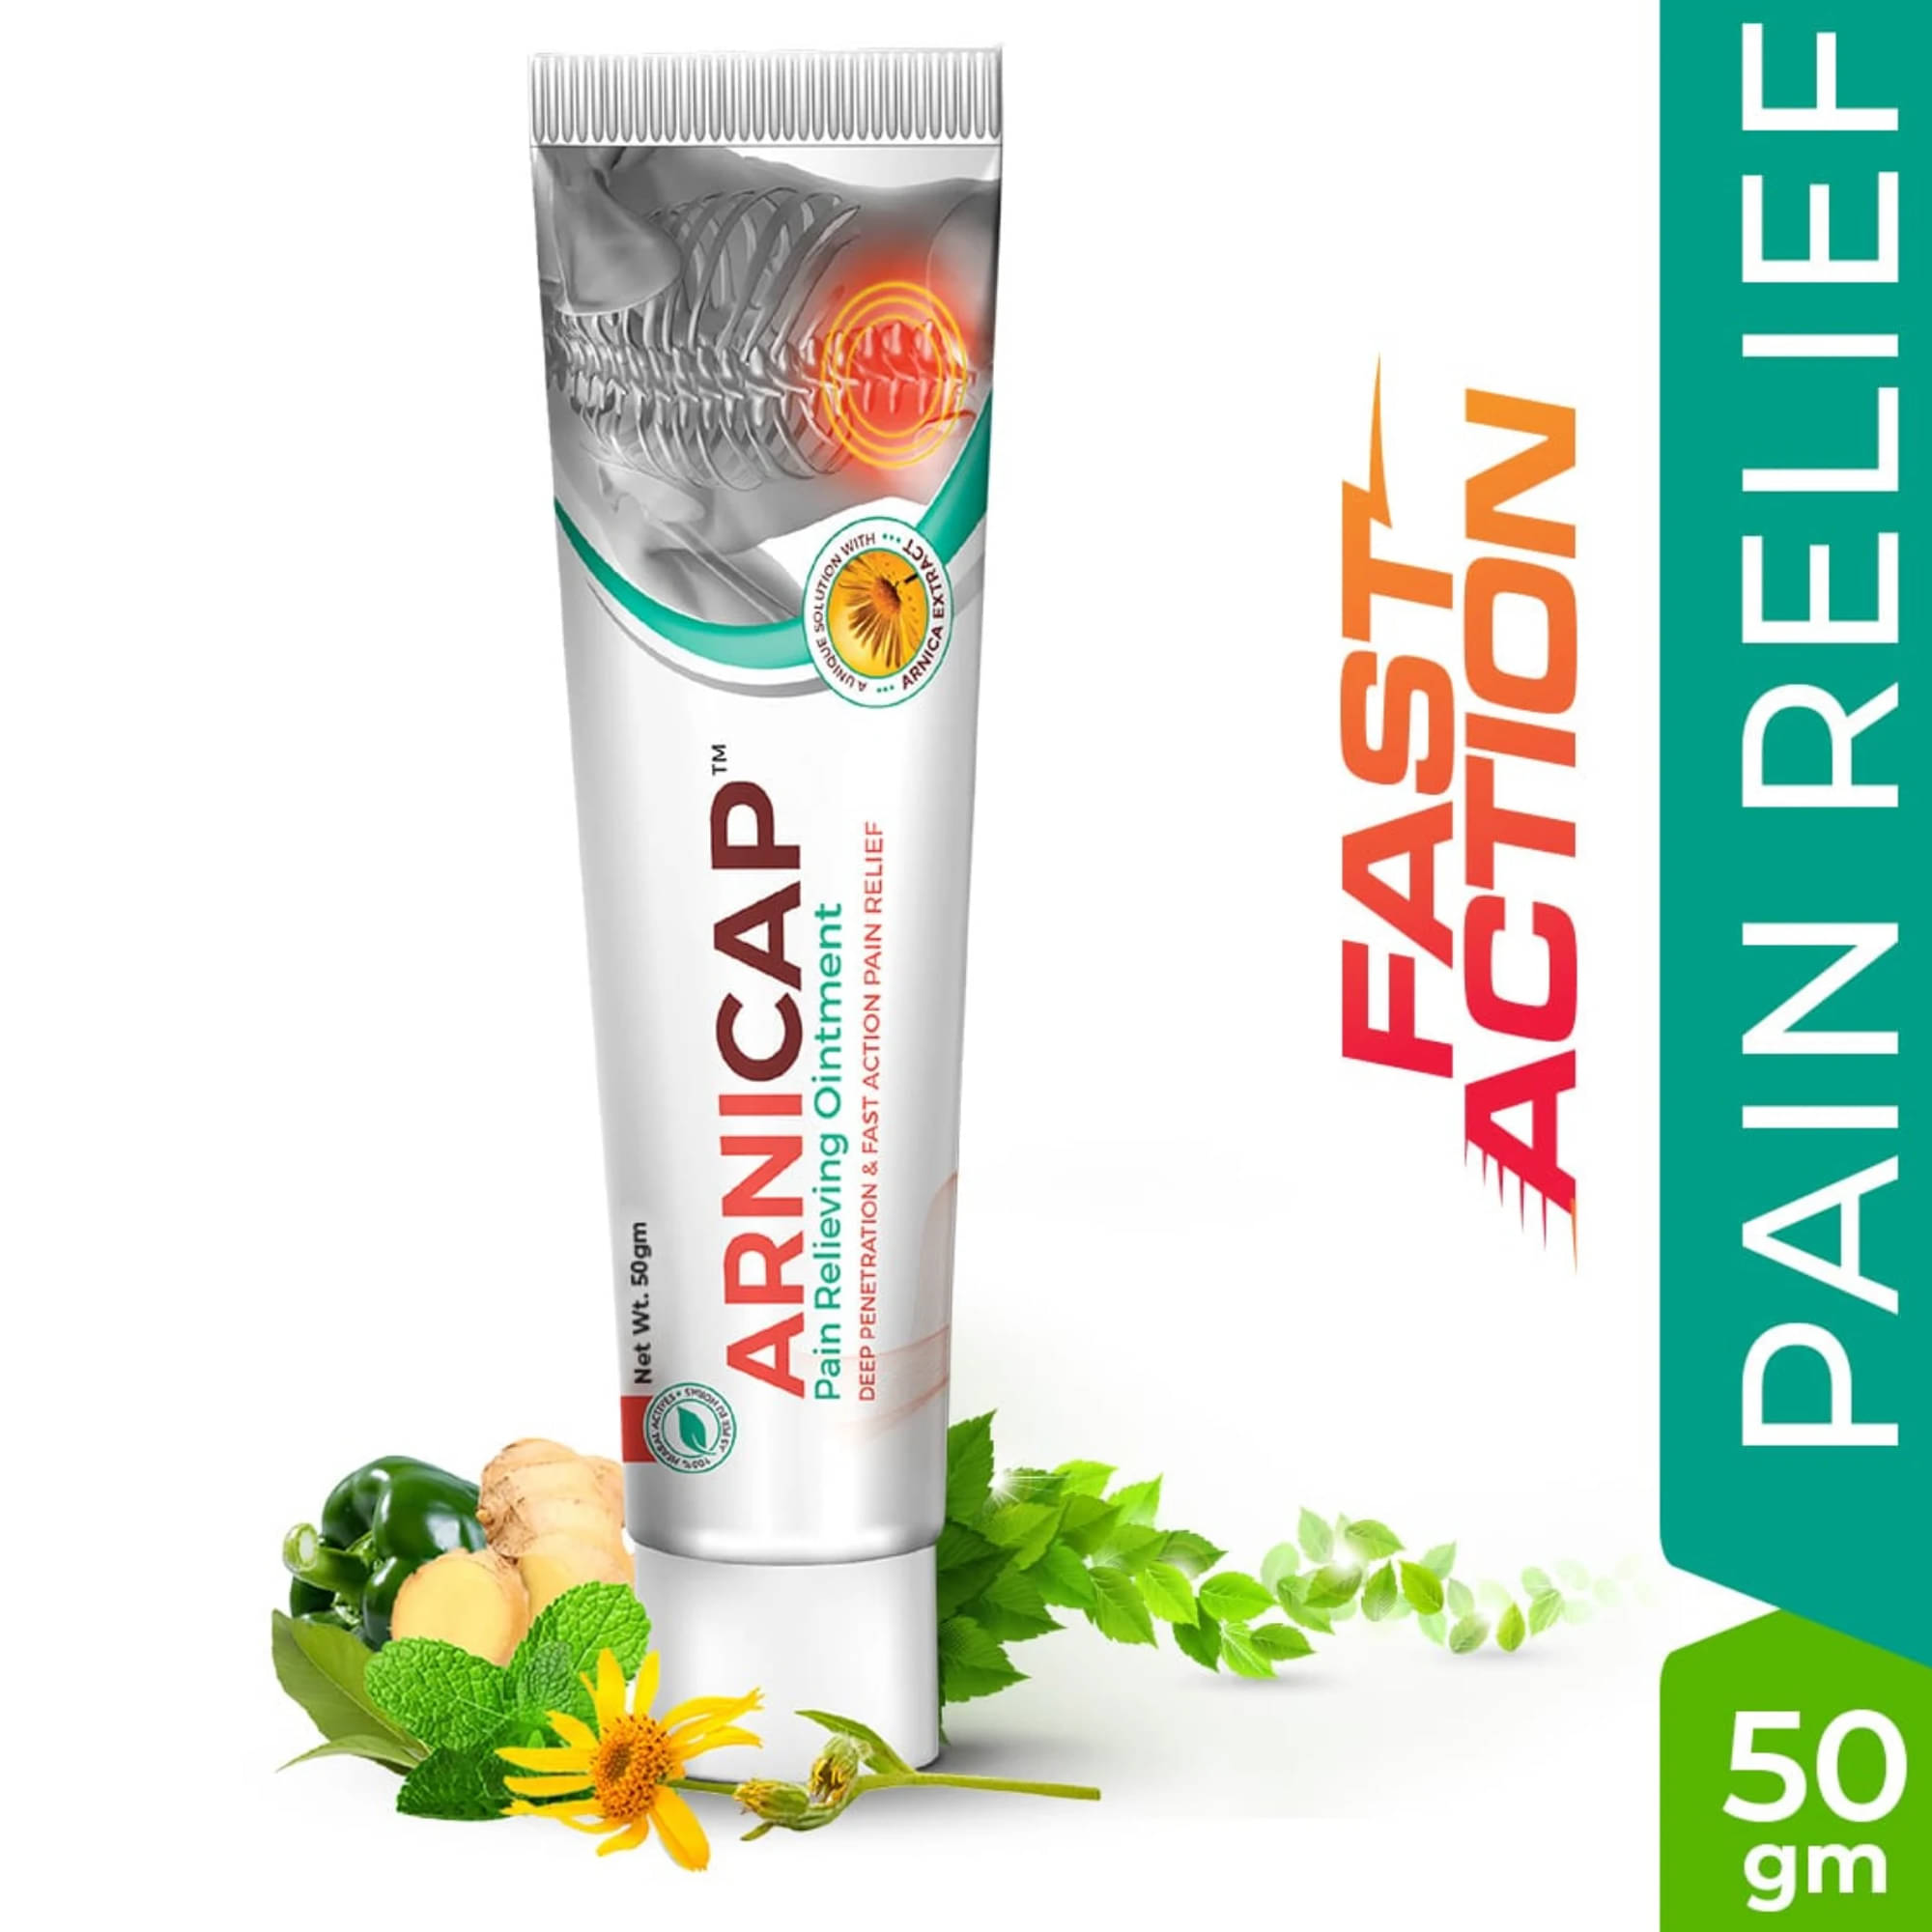 Body or Joint Pain Gel/Capsule at Upto 75%Off